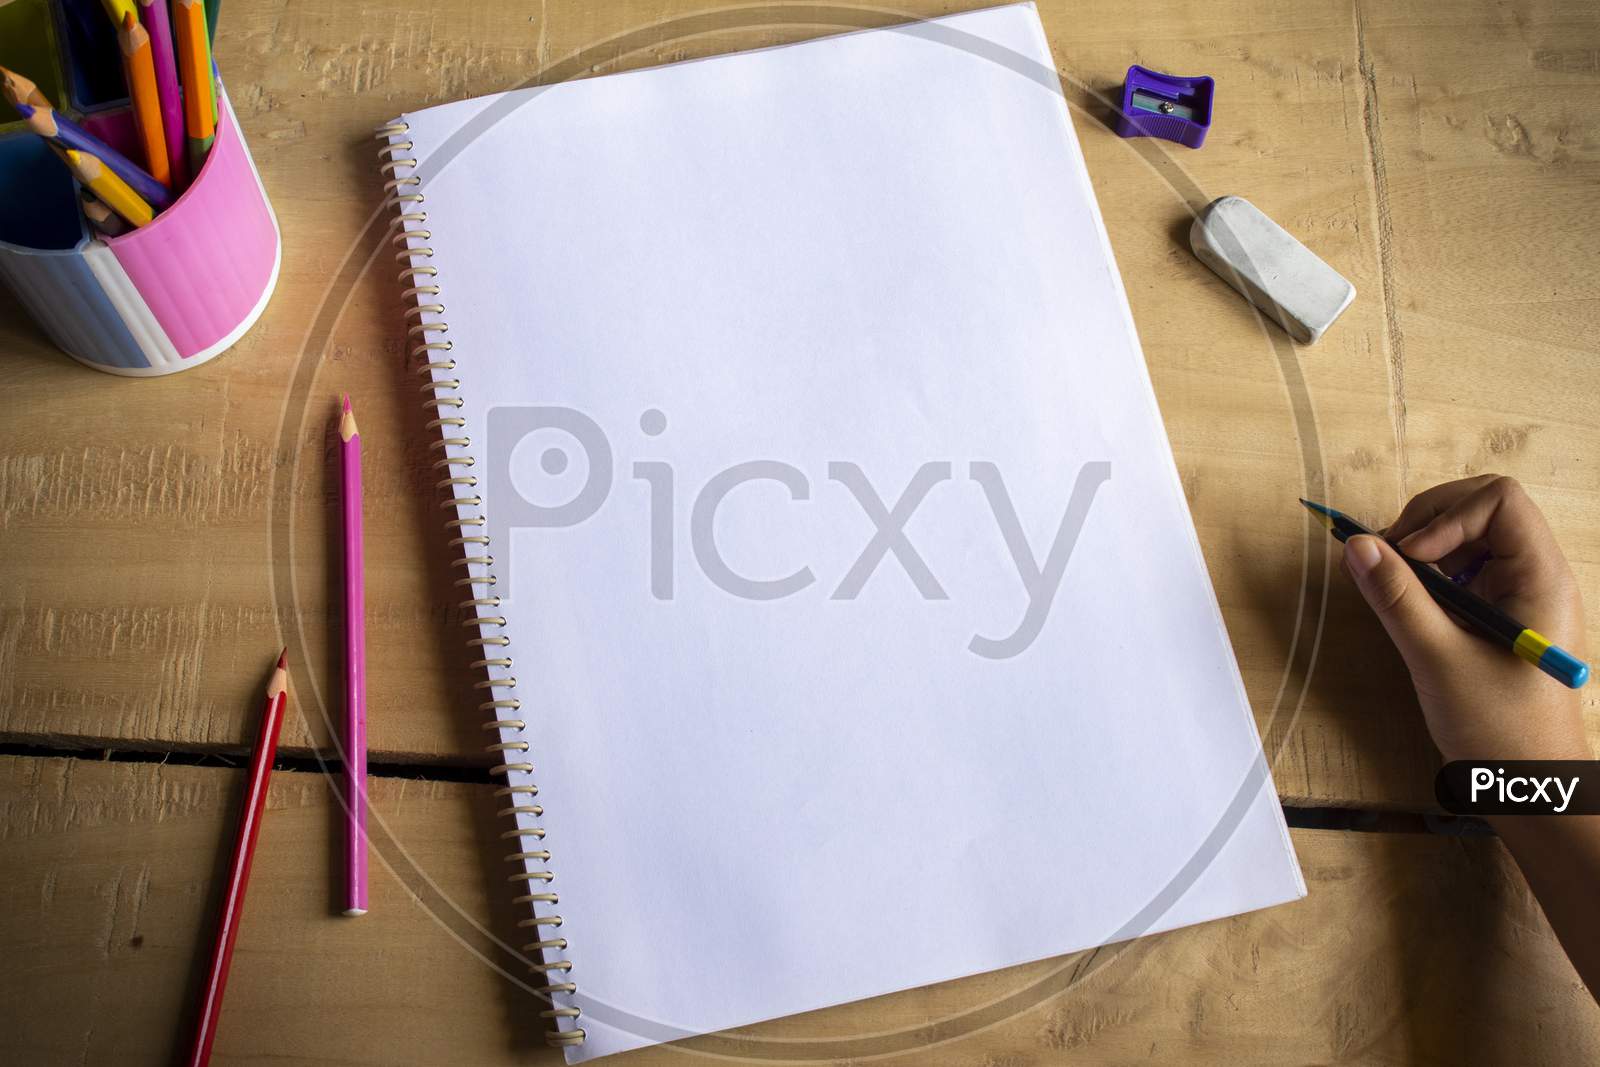 Top View Of An Empty White Notebook Space For Text, Color Pencils, Eraser, Sharpener And Human Hand Holding Pencil On Wooden Table